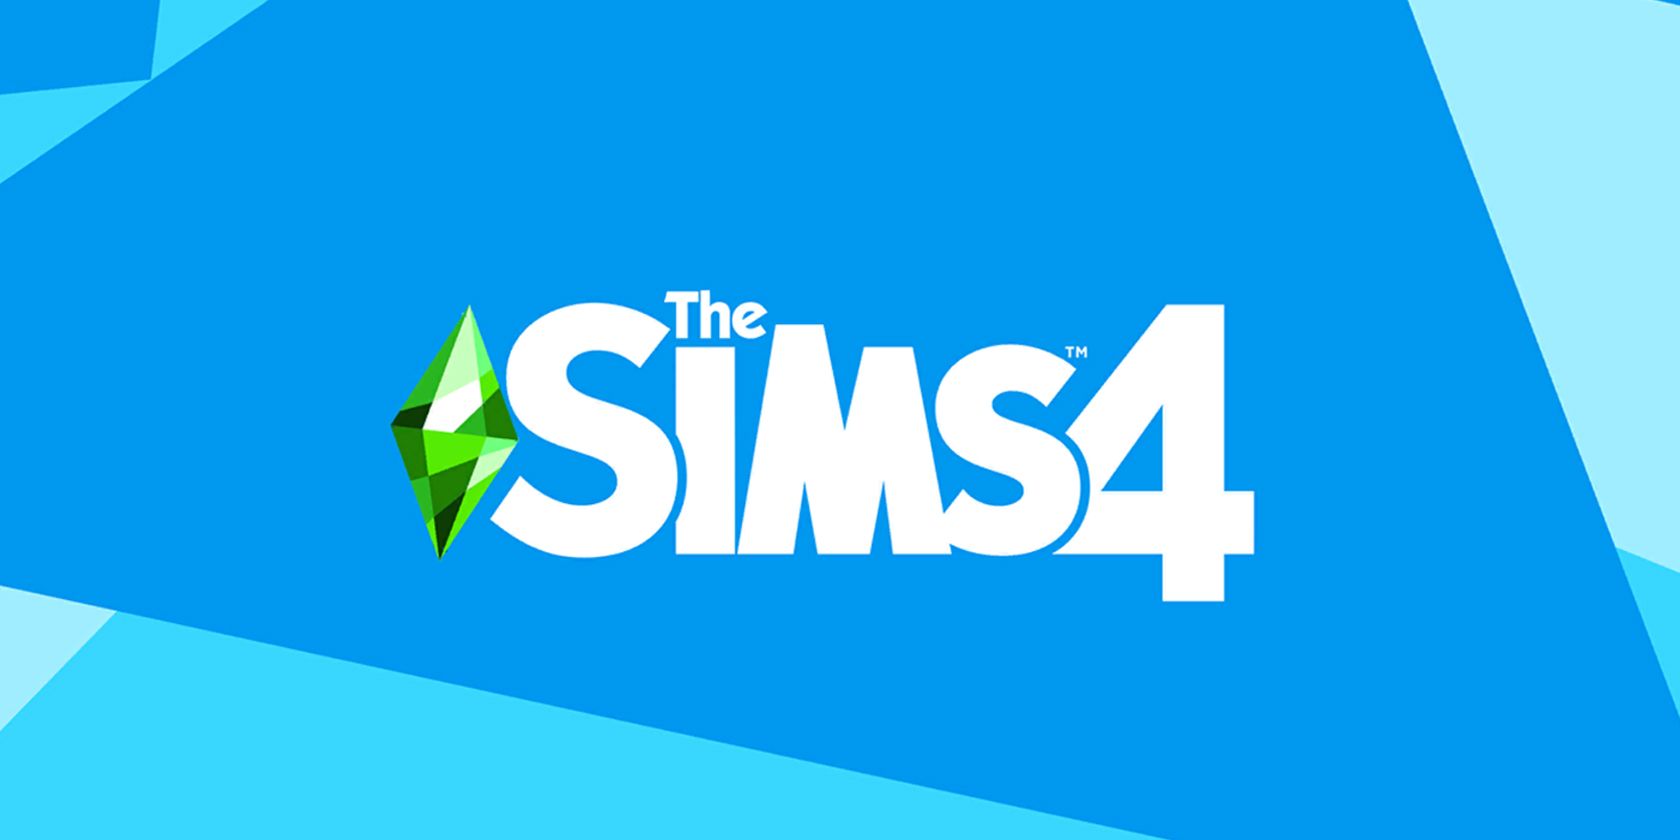 How to Get The Sims 4 for Free and Play It